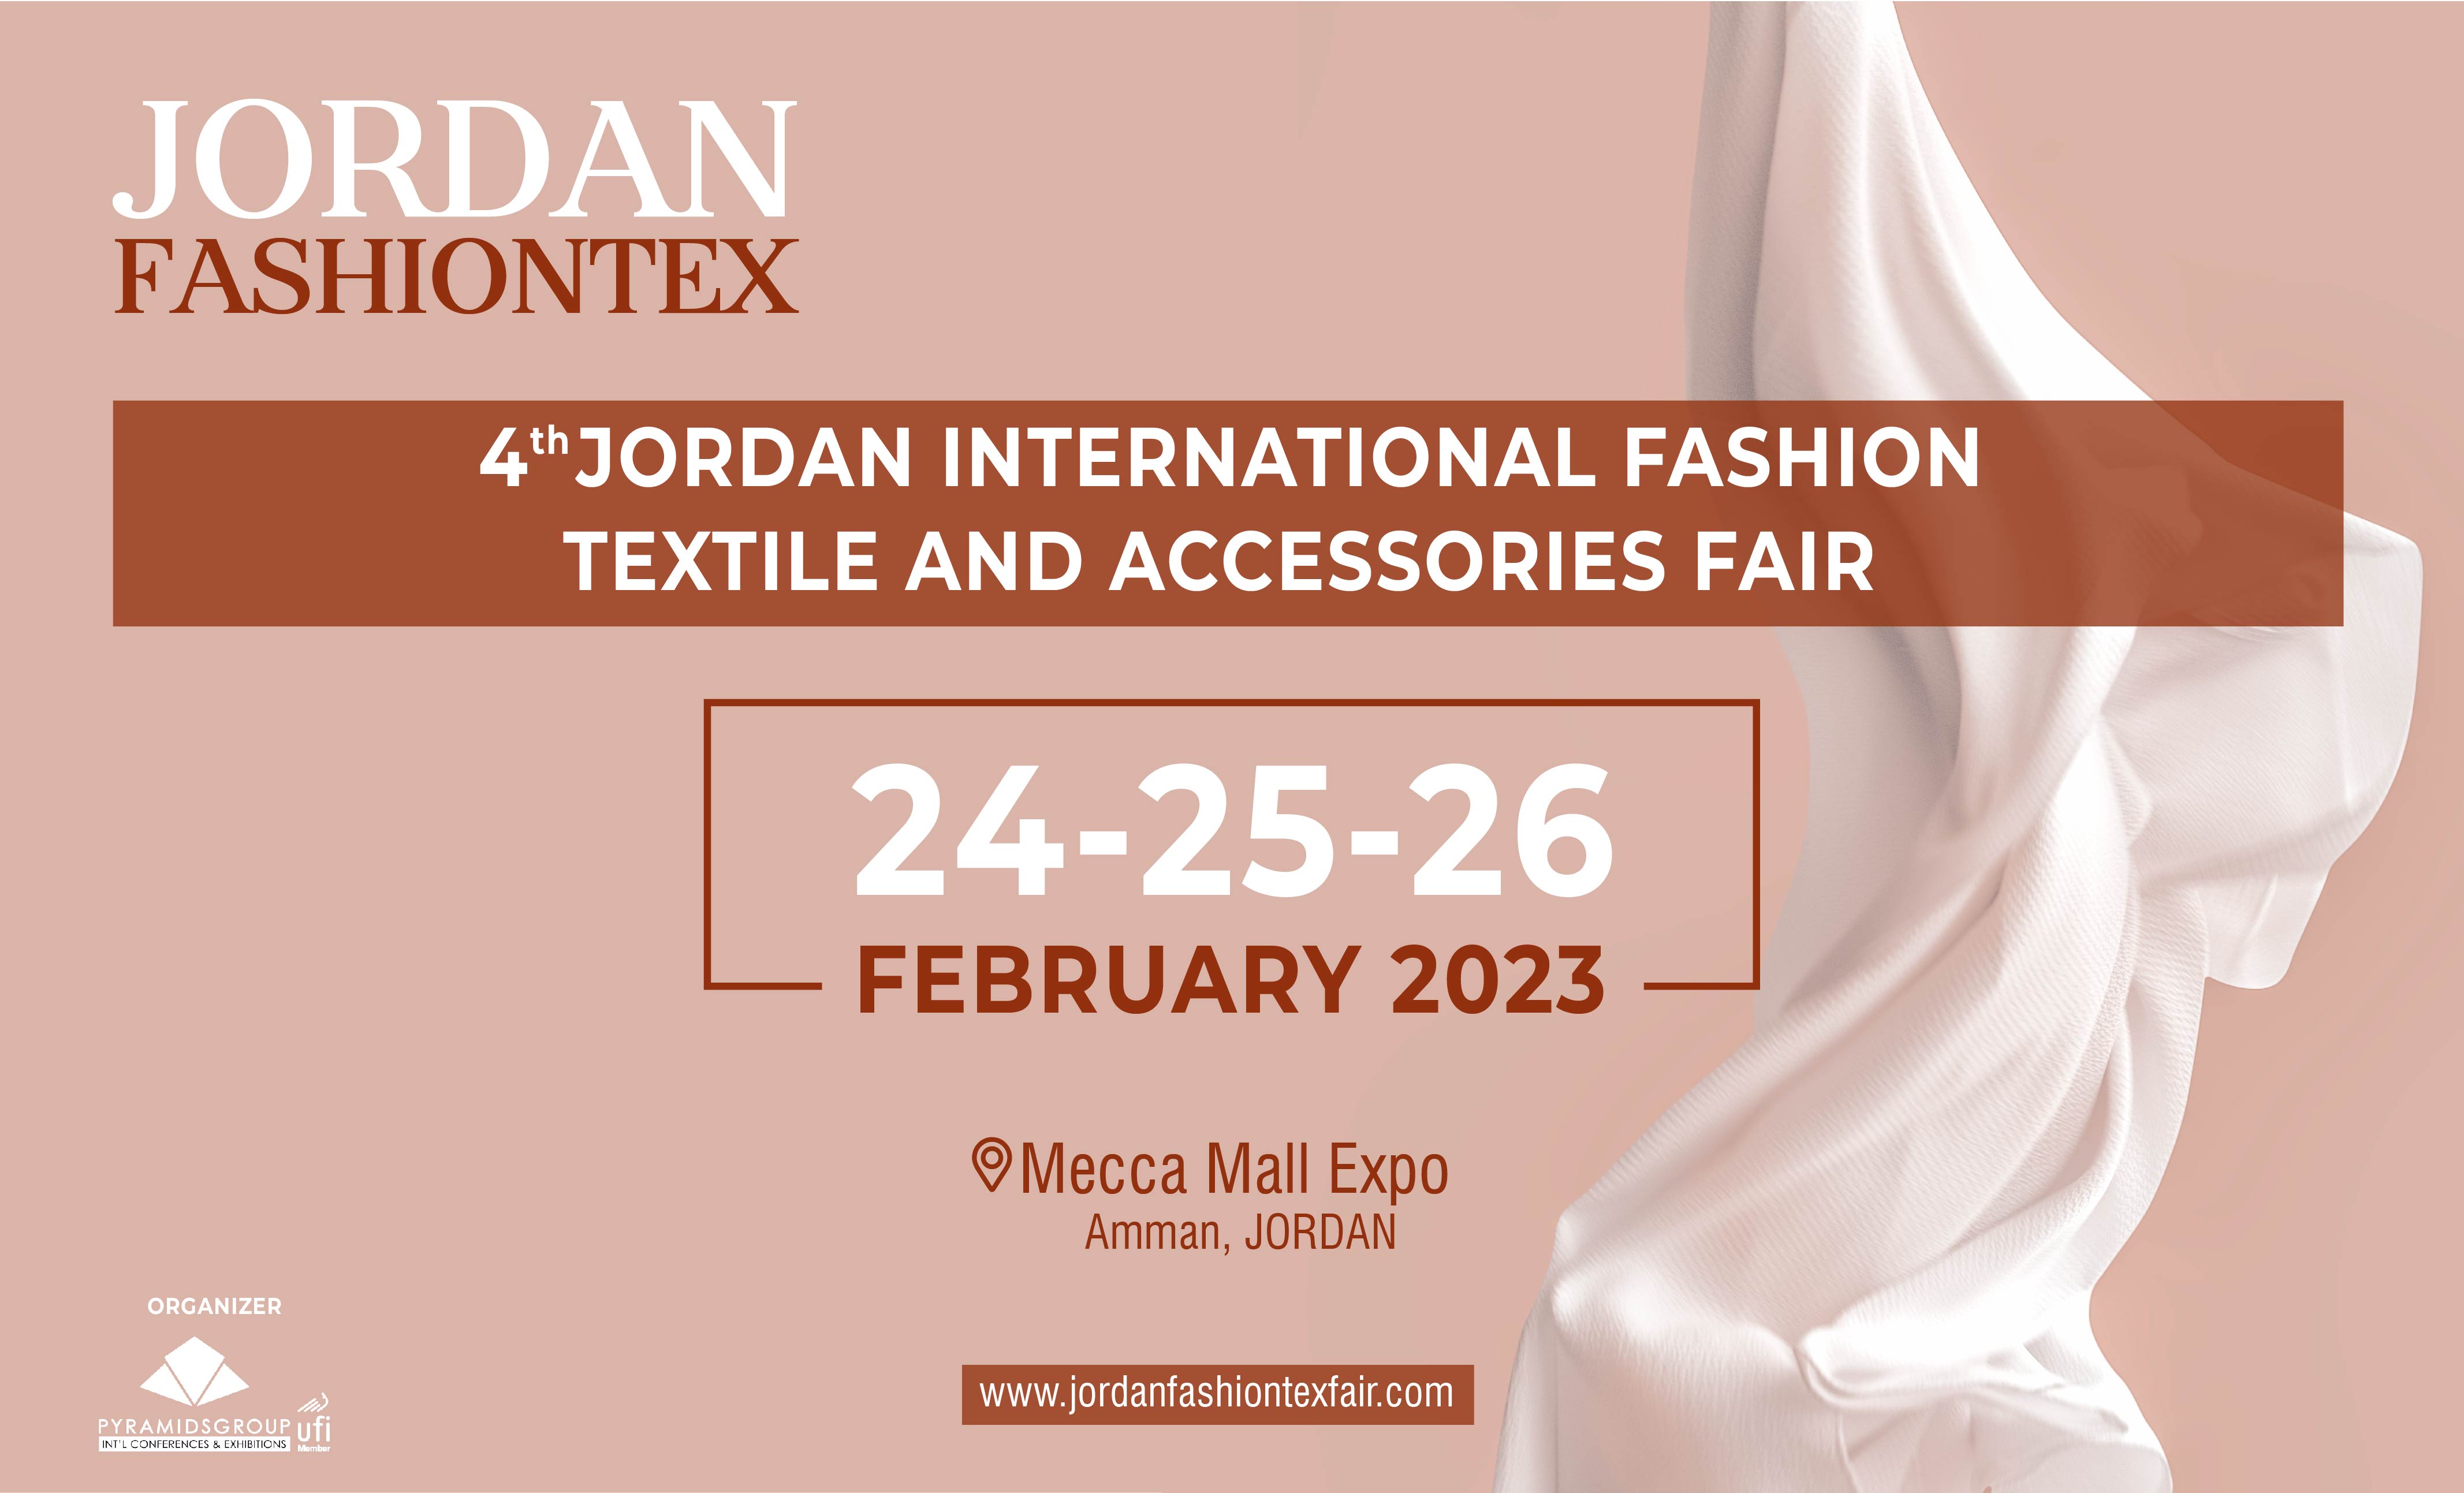 We will be 4th JORDAN INTERNATIONAL FASHION, TEXTILE AND ACCESSORIES Exhibition on 24  26 February 2023 at booth Stand  B24 with latest product profile of Bornewa